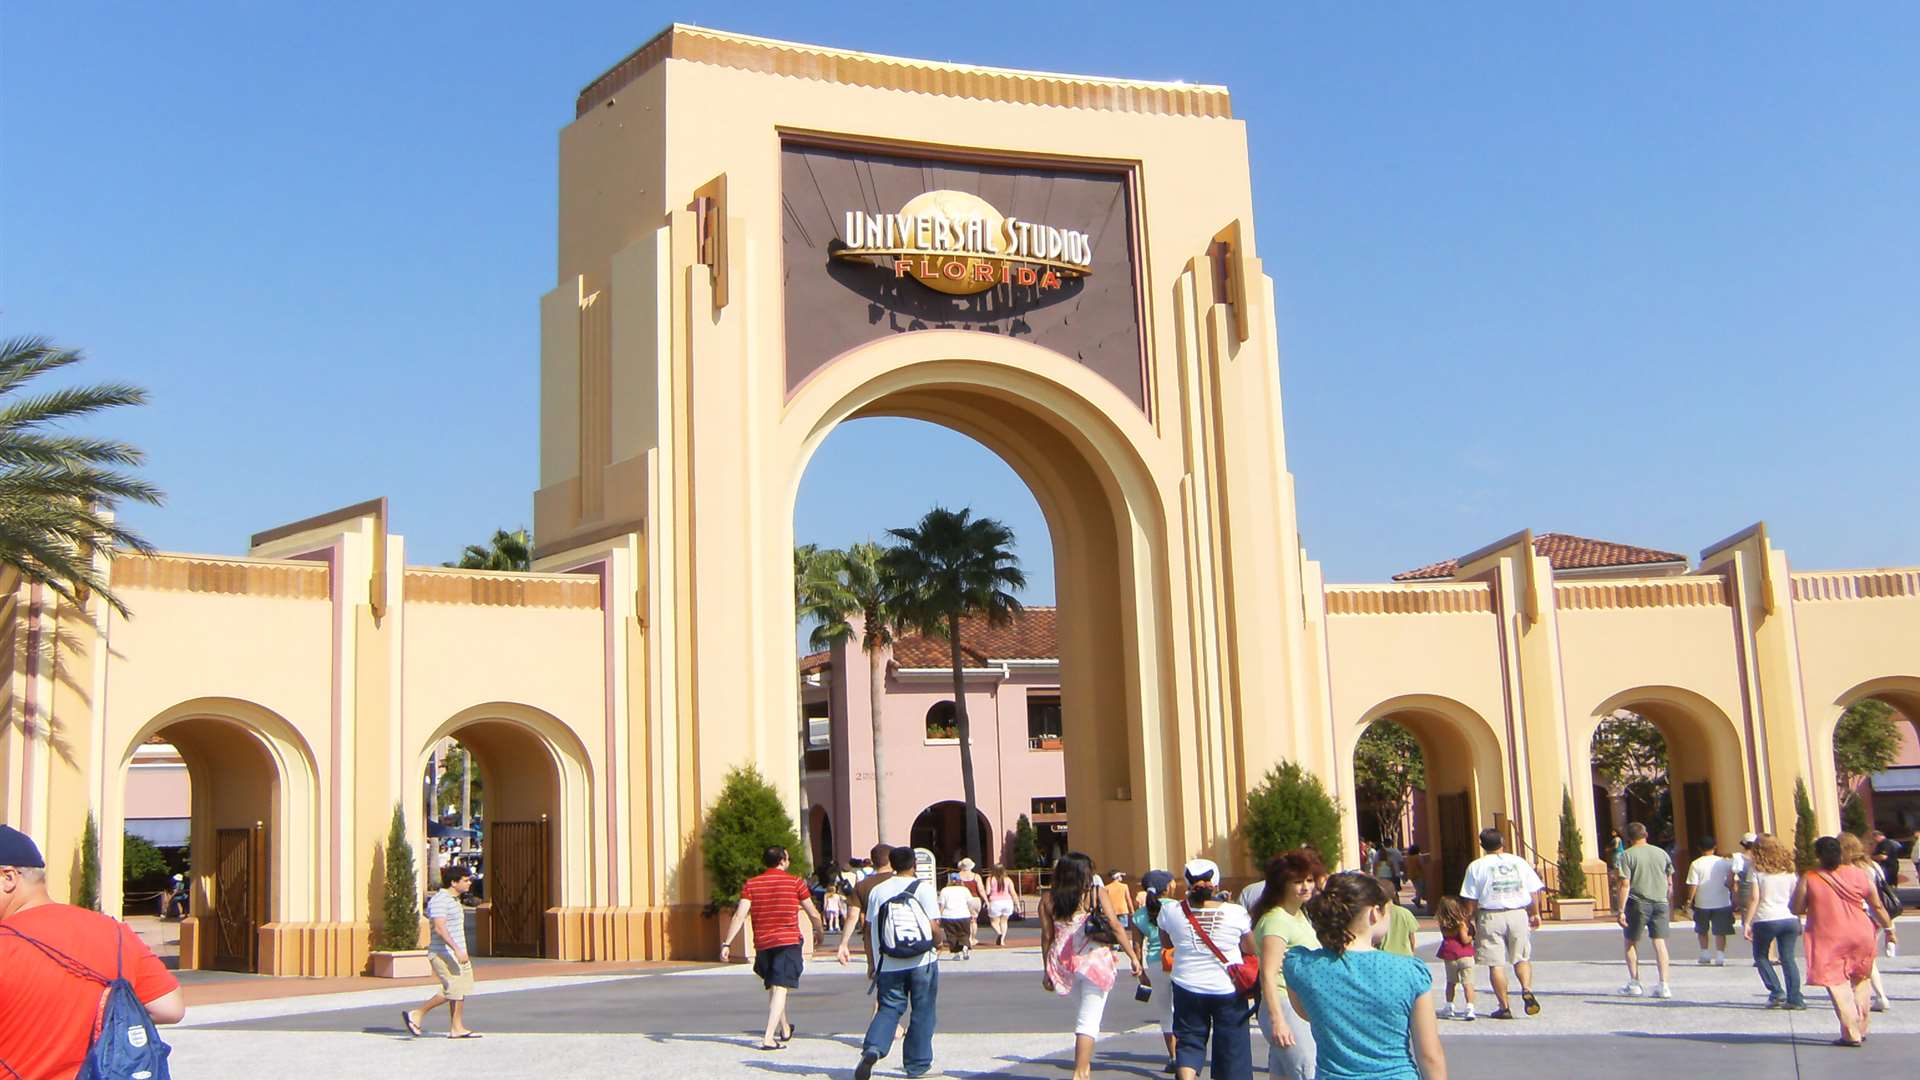 The gate to Universal Studios in Florida